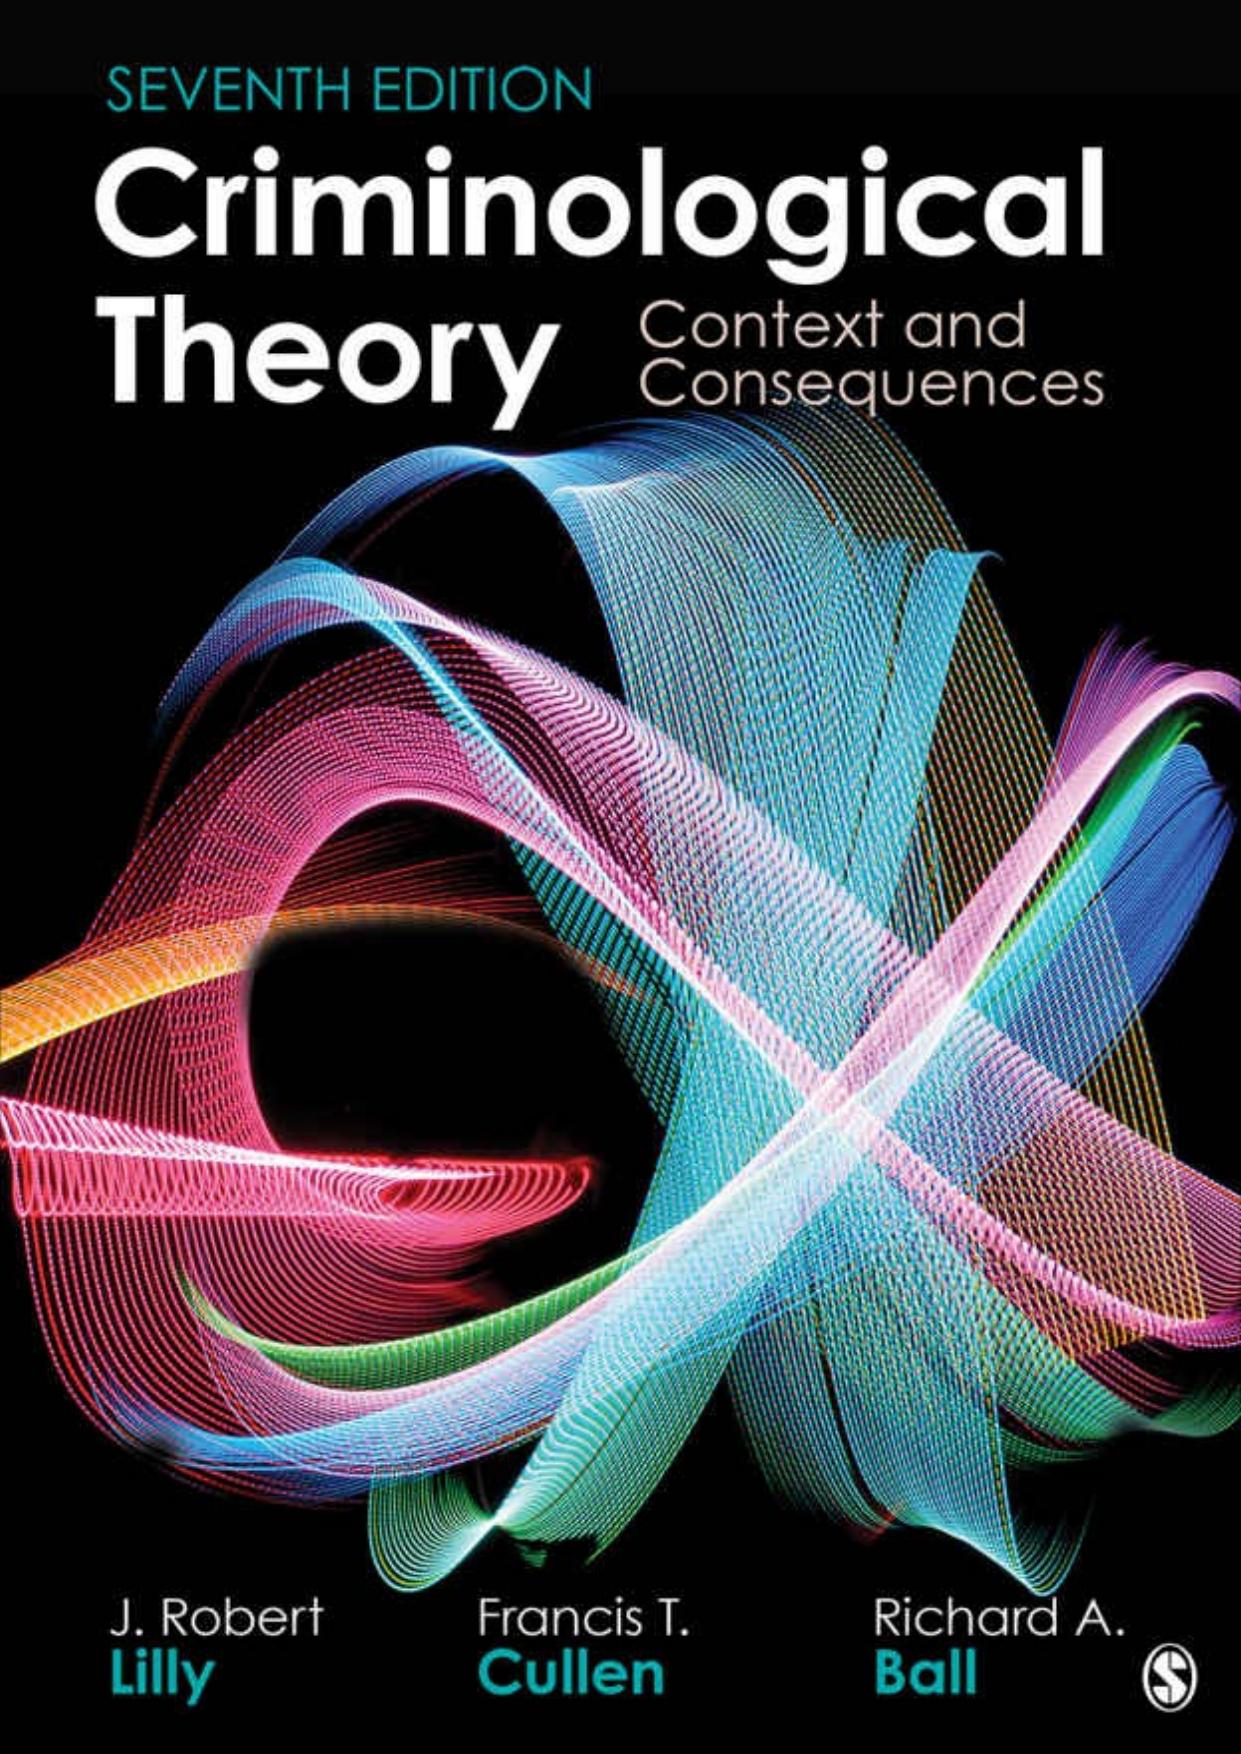 Criminological Theory Context and Consequences 7th Edition  by  J. Robert Lilly  and  Francis T. Cullen  and  Richard A. Ball